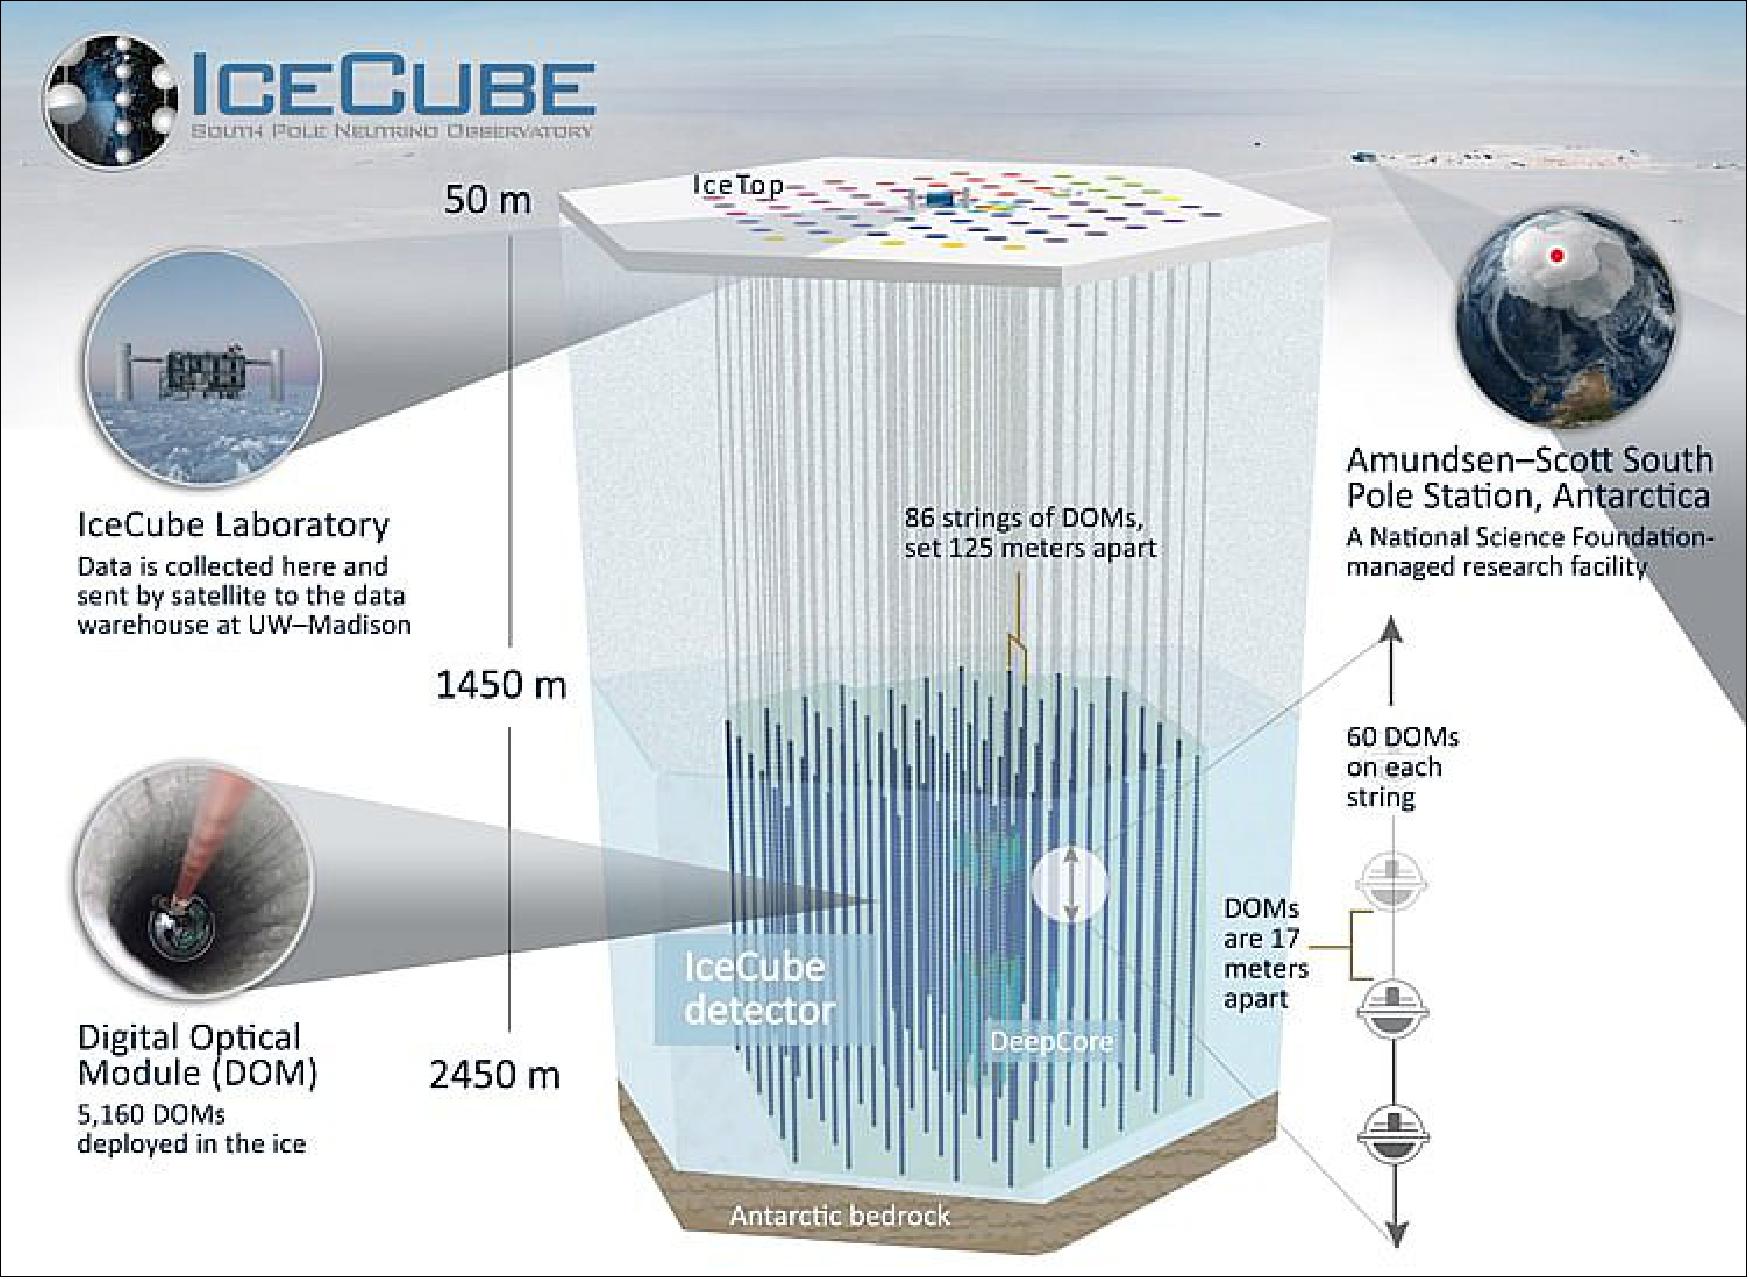 Figure 1: IceCube, the South Pole neutrino observatory, is a cubic-kilometer particle detector made of Antarctic ice and located near the Amundsen-Scott South Pole Station. It is buried beneath the surface, extending to a depth of about 2,500 meters. A surface array, IceTop, and a denser inner subdetector, DeepCore, significantly enhance the capabilities of the observatory, making it a multipurpose facility (image credit: IceCube Collaboration)